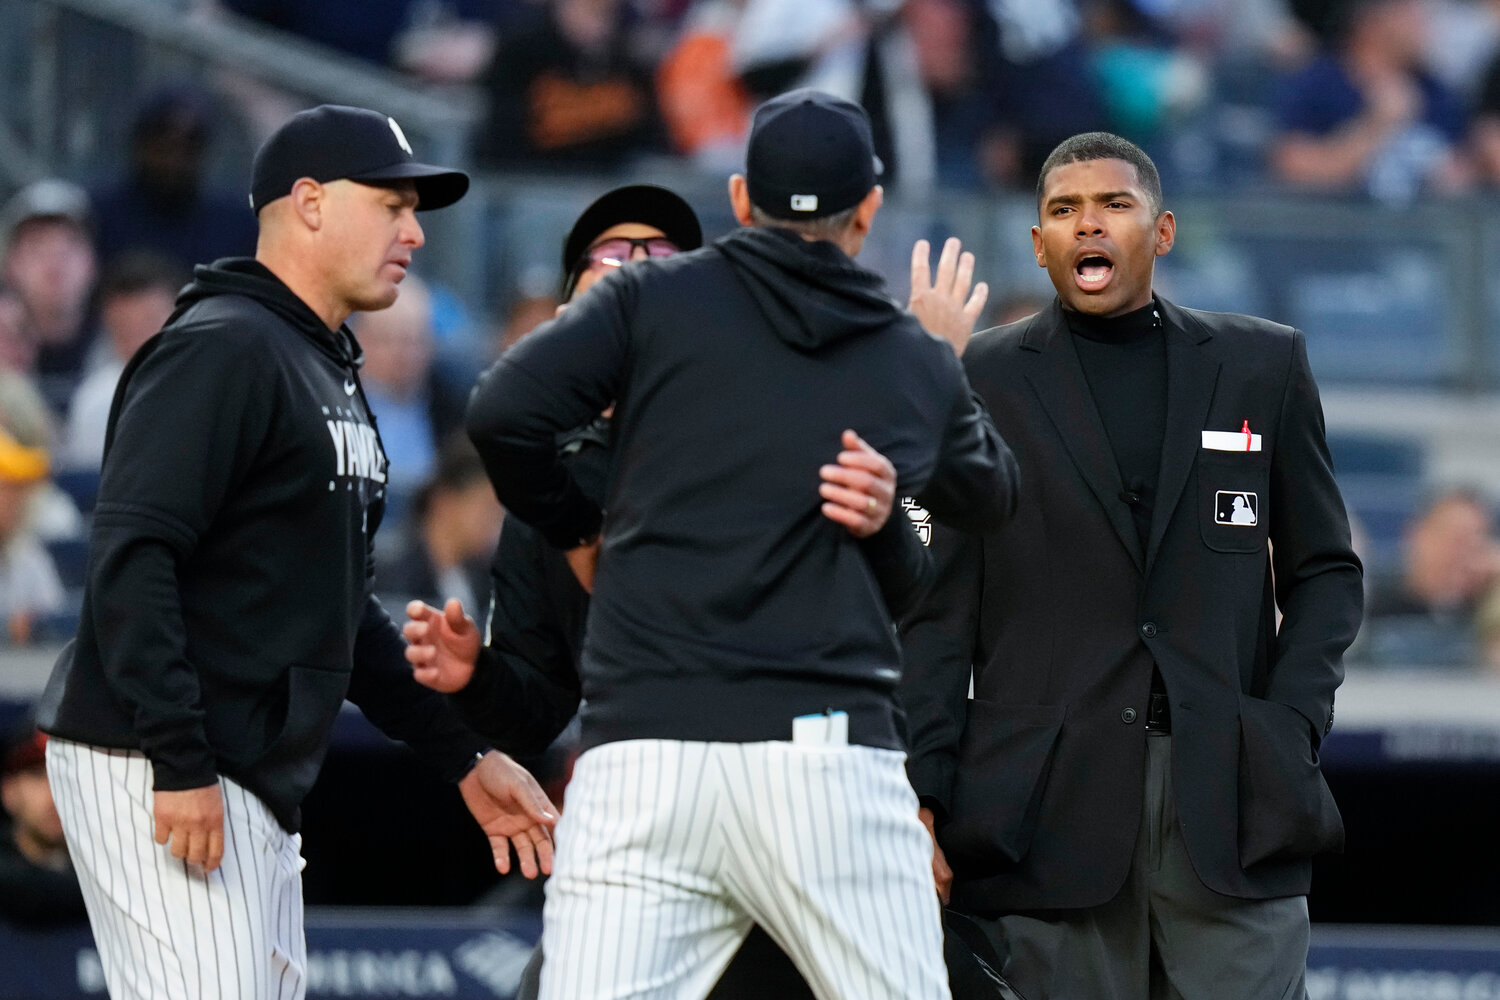 Home plate umpire Edwin Moscoso, right, talks to New York Yankees manager Aaron Boone as Boone is restrained after being ejected during the third inning of the team’s game against the Baltimore Orioles on Thursday night in New York.